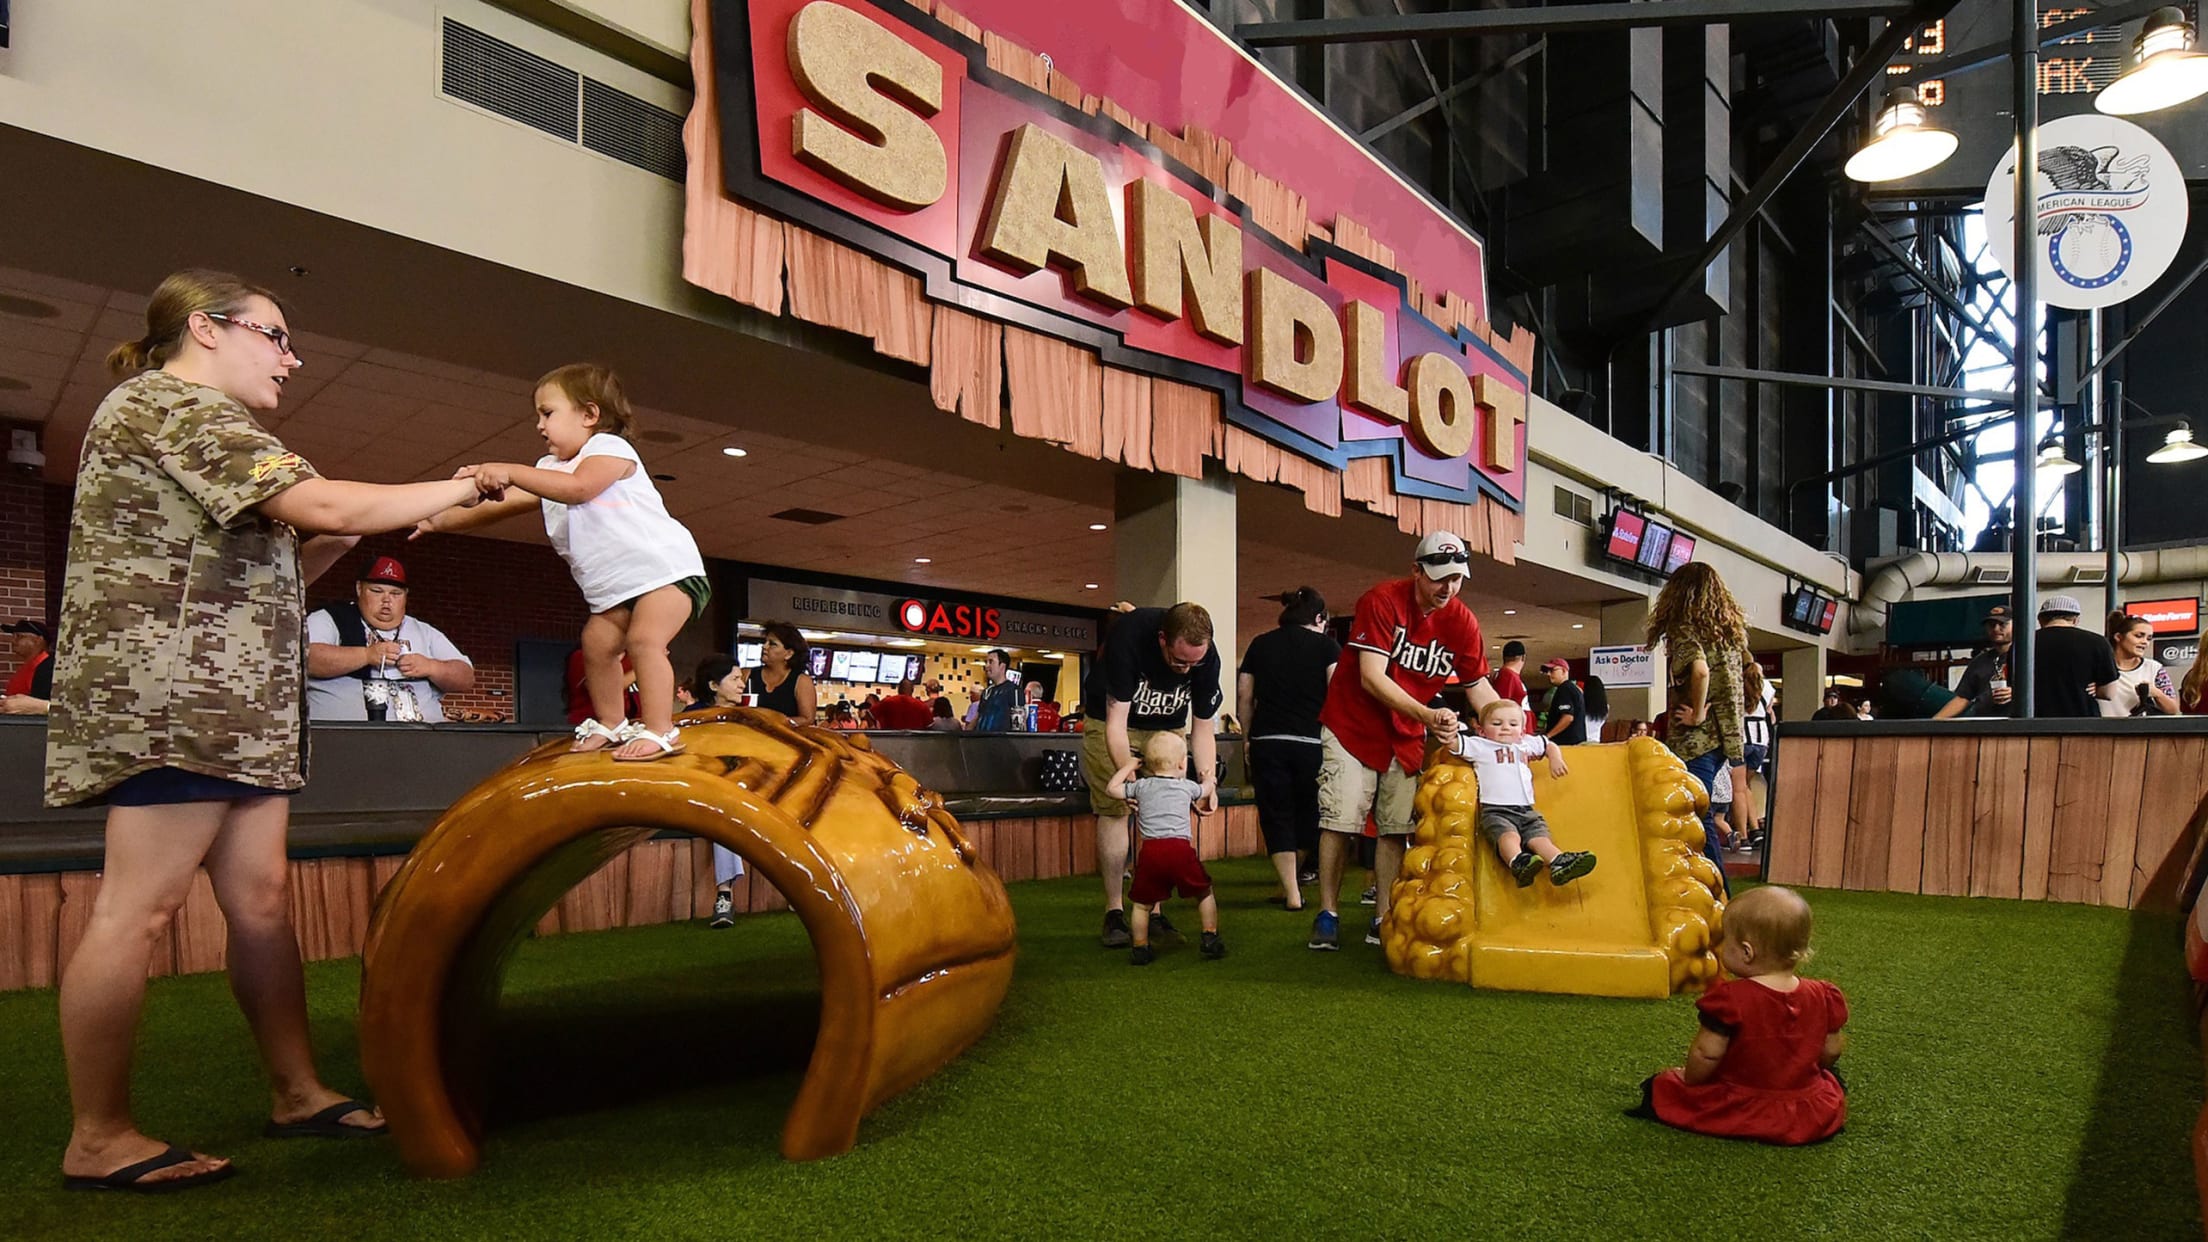 What's so wrong about Chase Field's location, anyway? - AZ Snake Pit